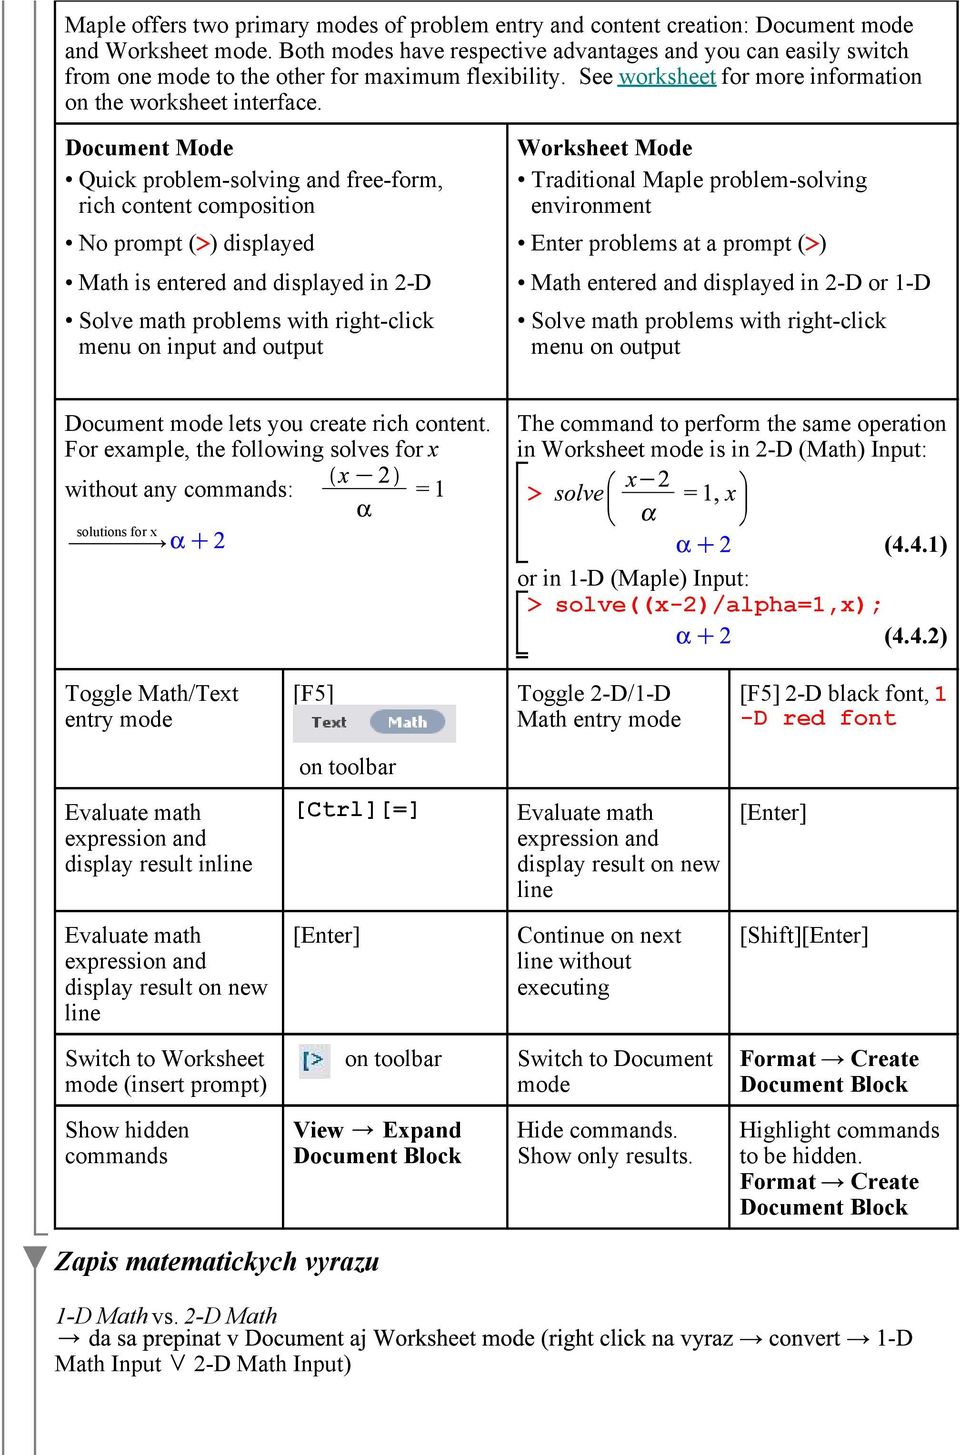 Document Mode Quick problem-solving and free-form, rich content composition No prompt () displayed Math is entered and displayed in 2-D Solve math problems with right-click menu on input and output